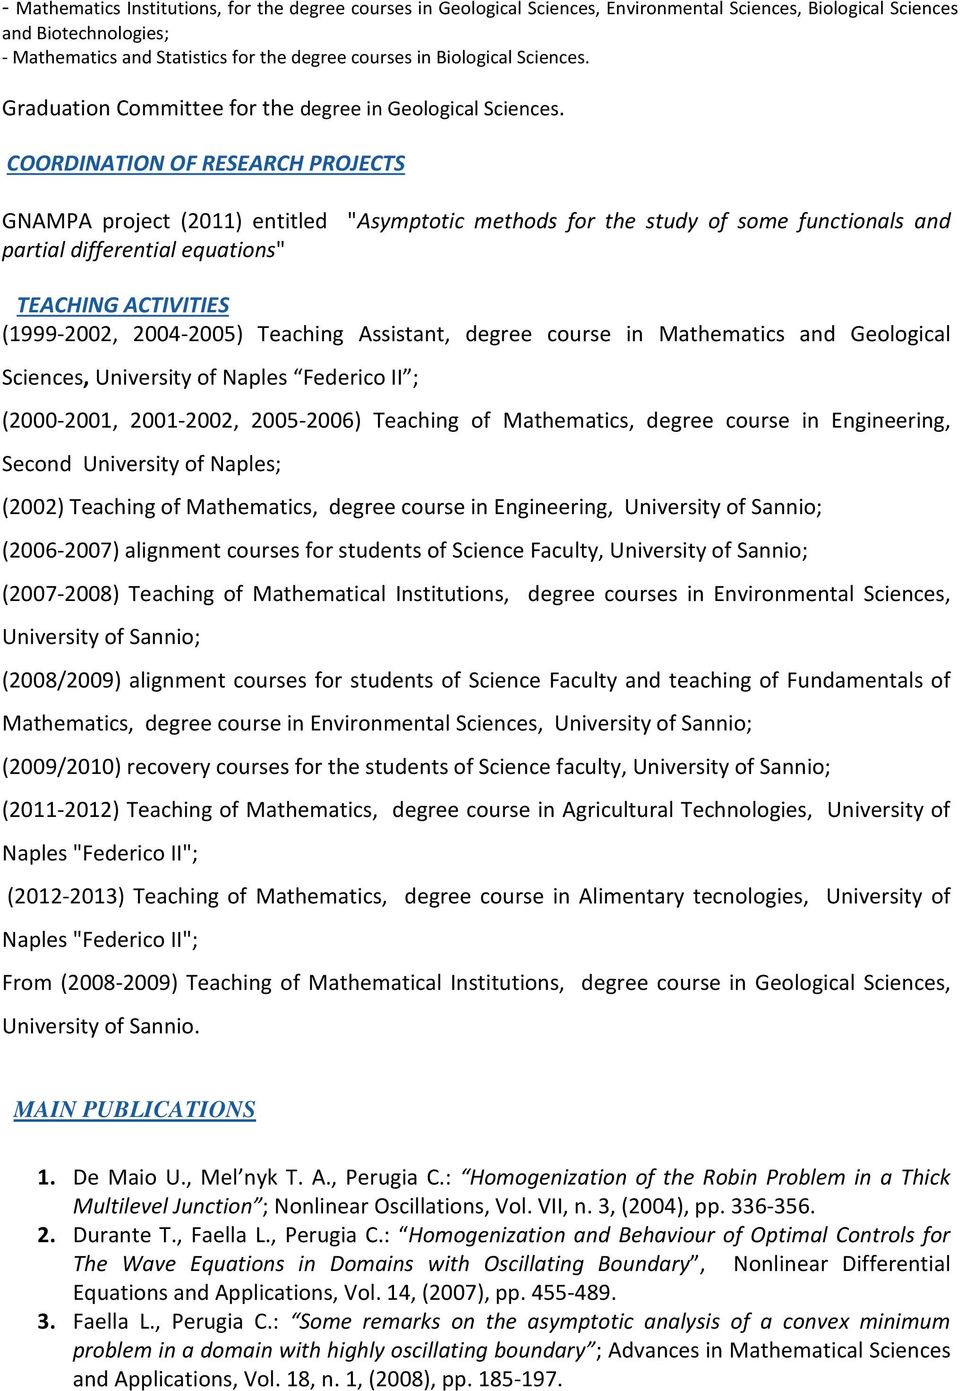 COORDINATION OF RESEARCH PROJECTS GNAMPA project (2011) entitled "Asymptotic methods for the study of some functionals and partial differential equations" TEACHING ACTIVITIES (1999-2002, 2004-2005)